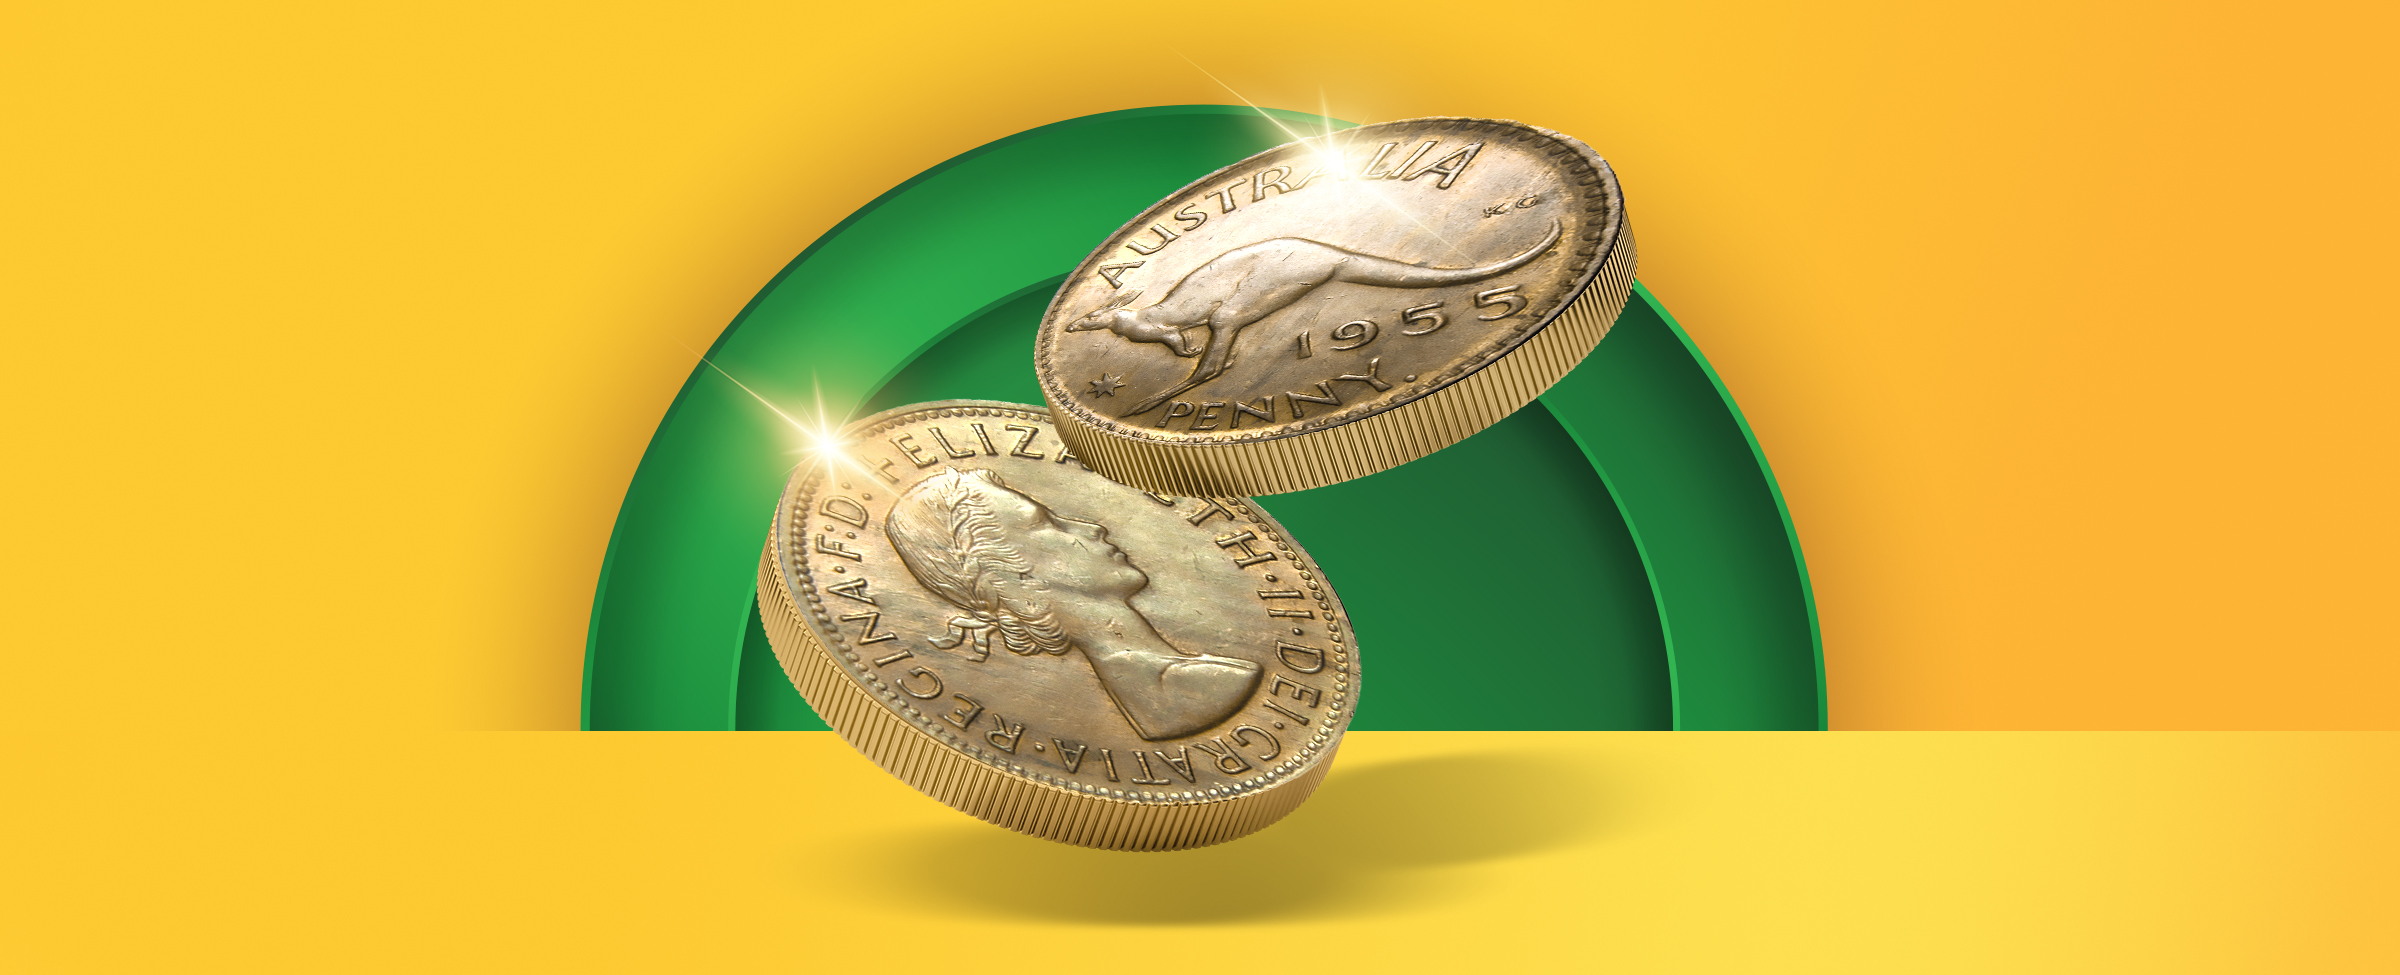 Two Australian pennies are centred, one displaying the ‘heads’ side up and the other displaying ‘tails’ side up. On a yellow background.